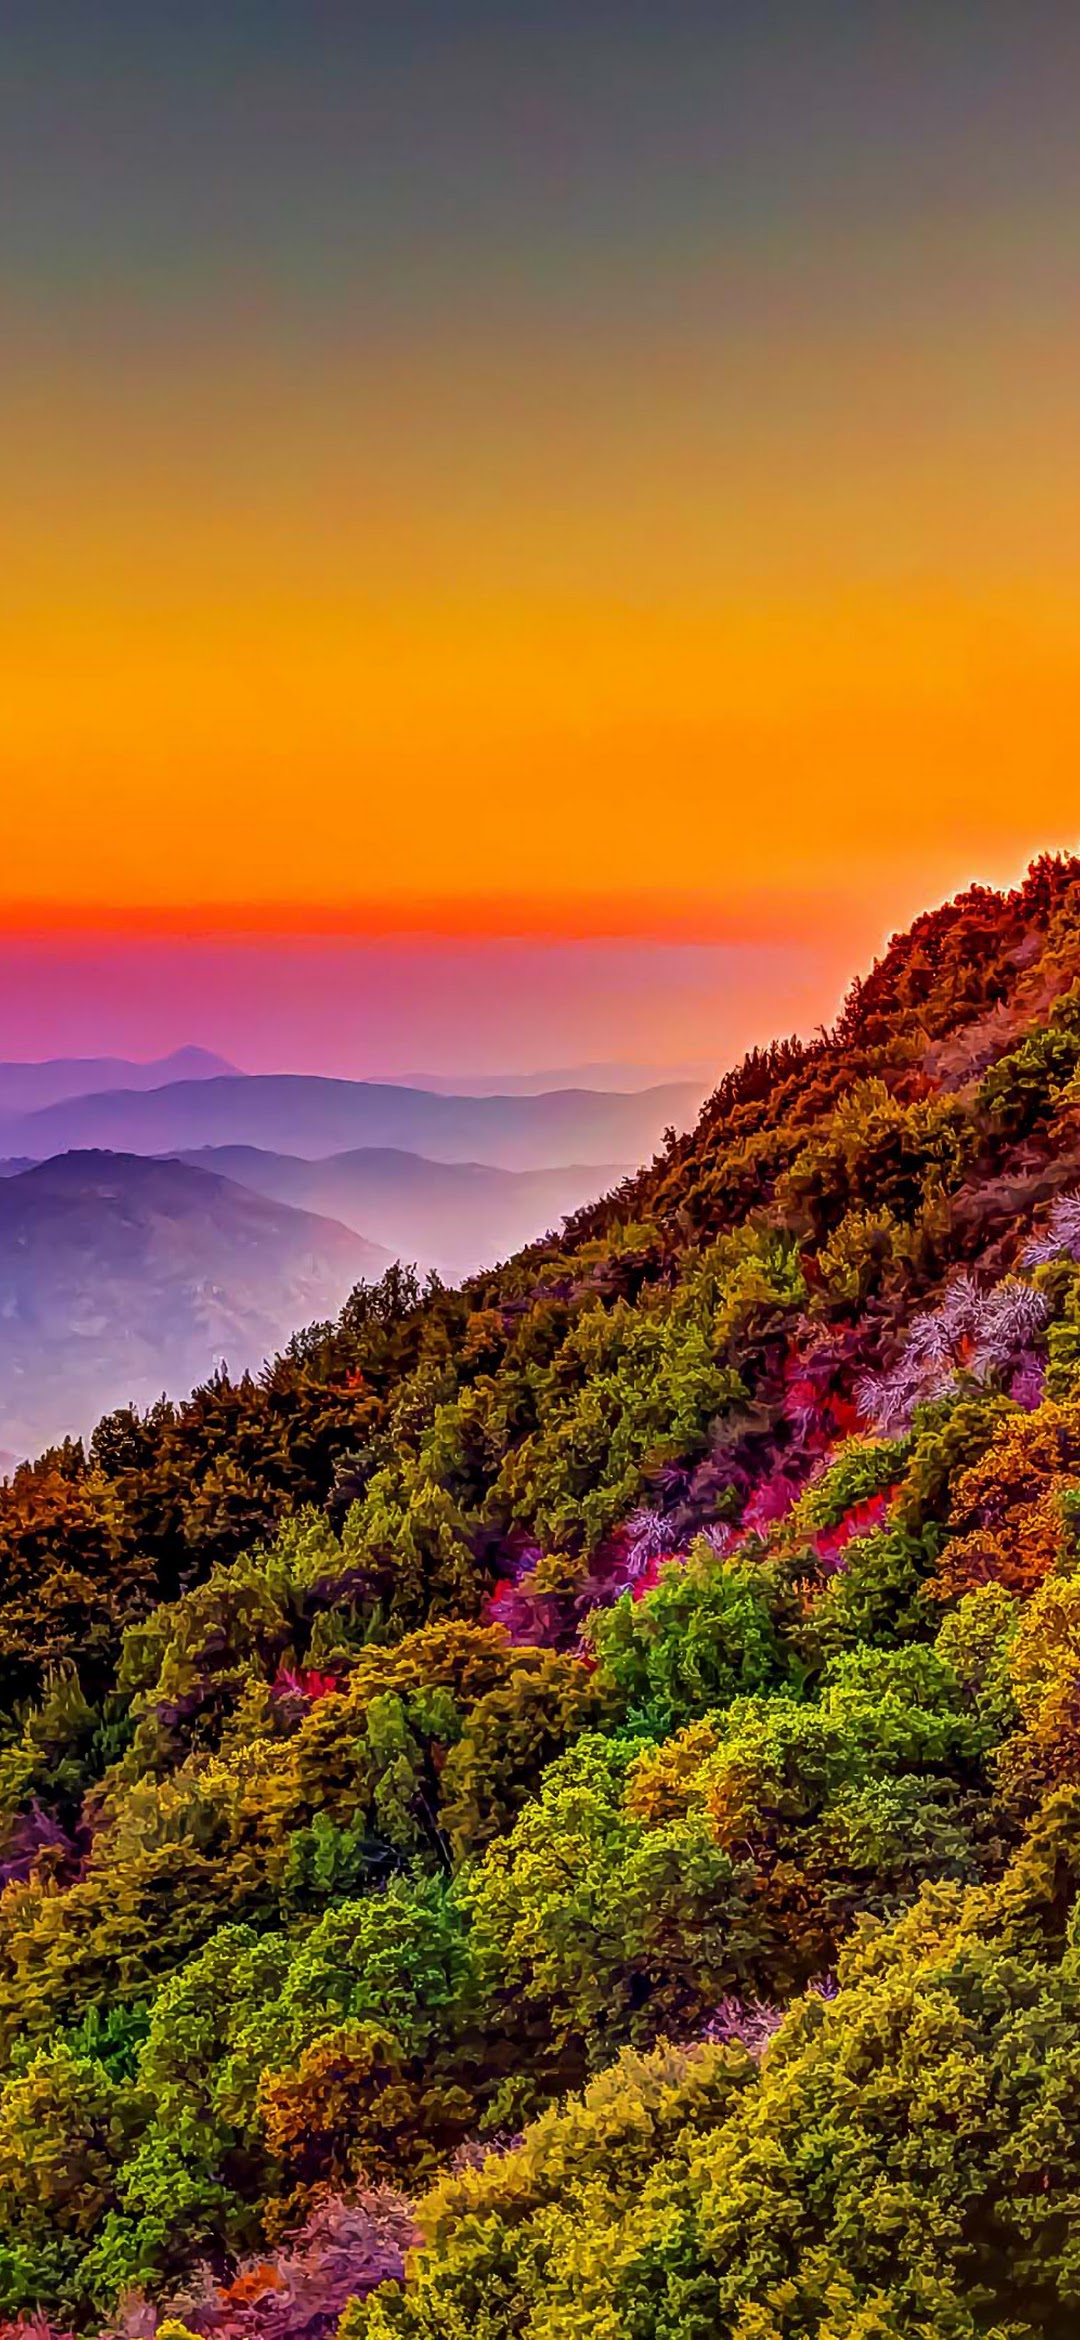 Mountain Colorful Forest Nature Sunset Scenery 4K Wallpaper